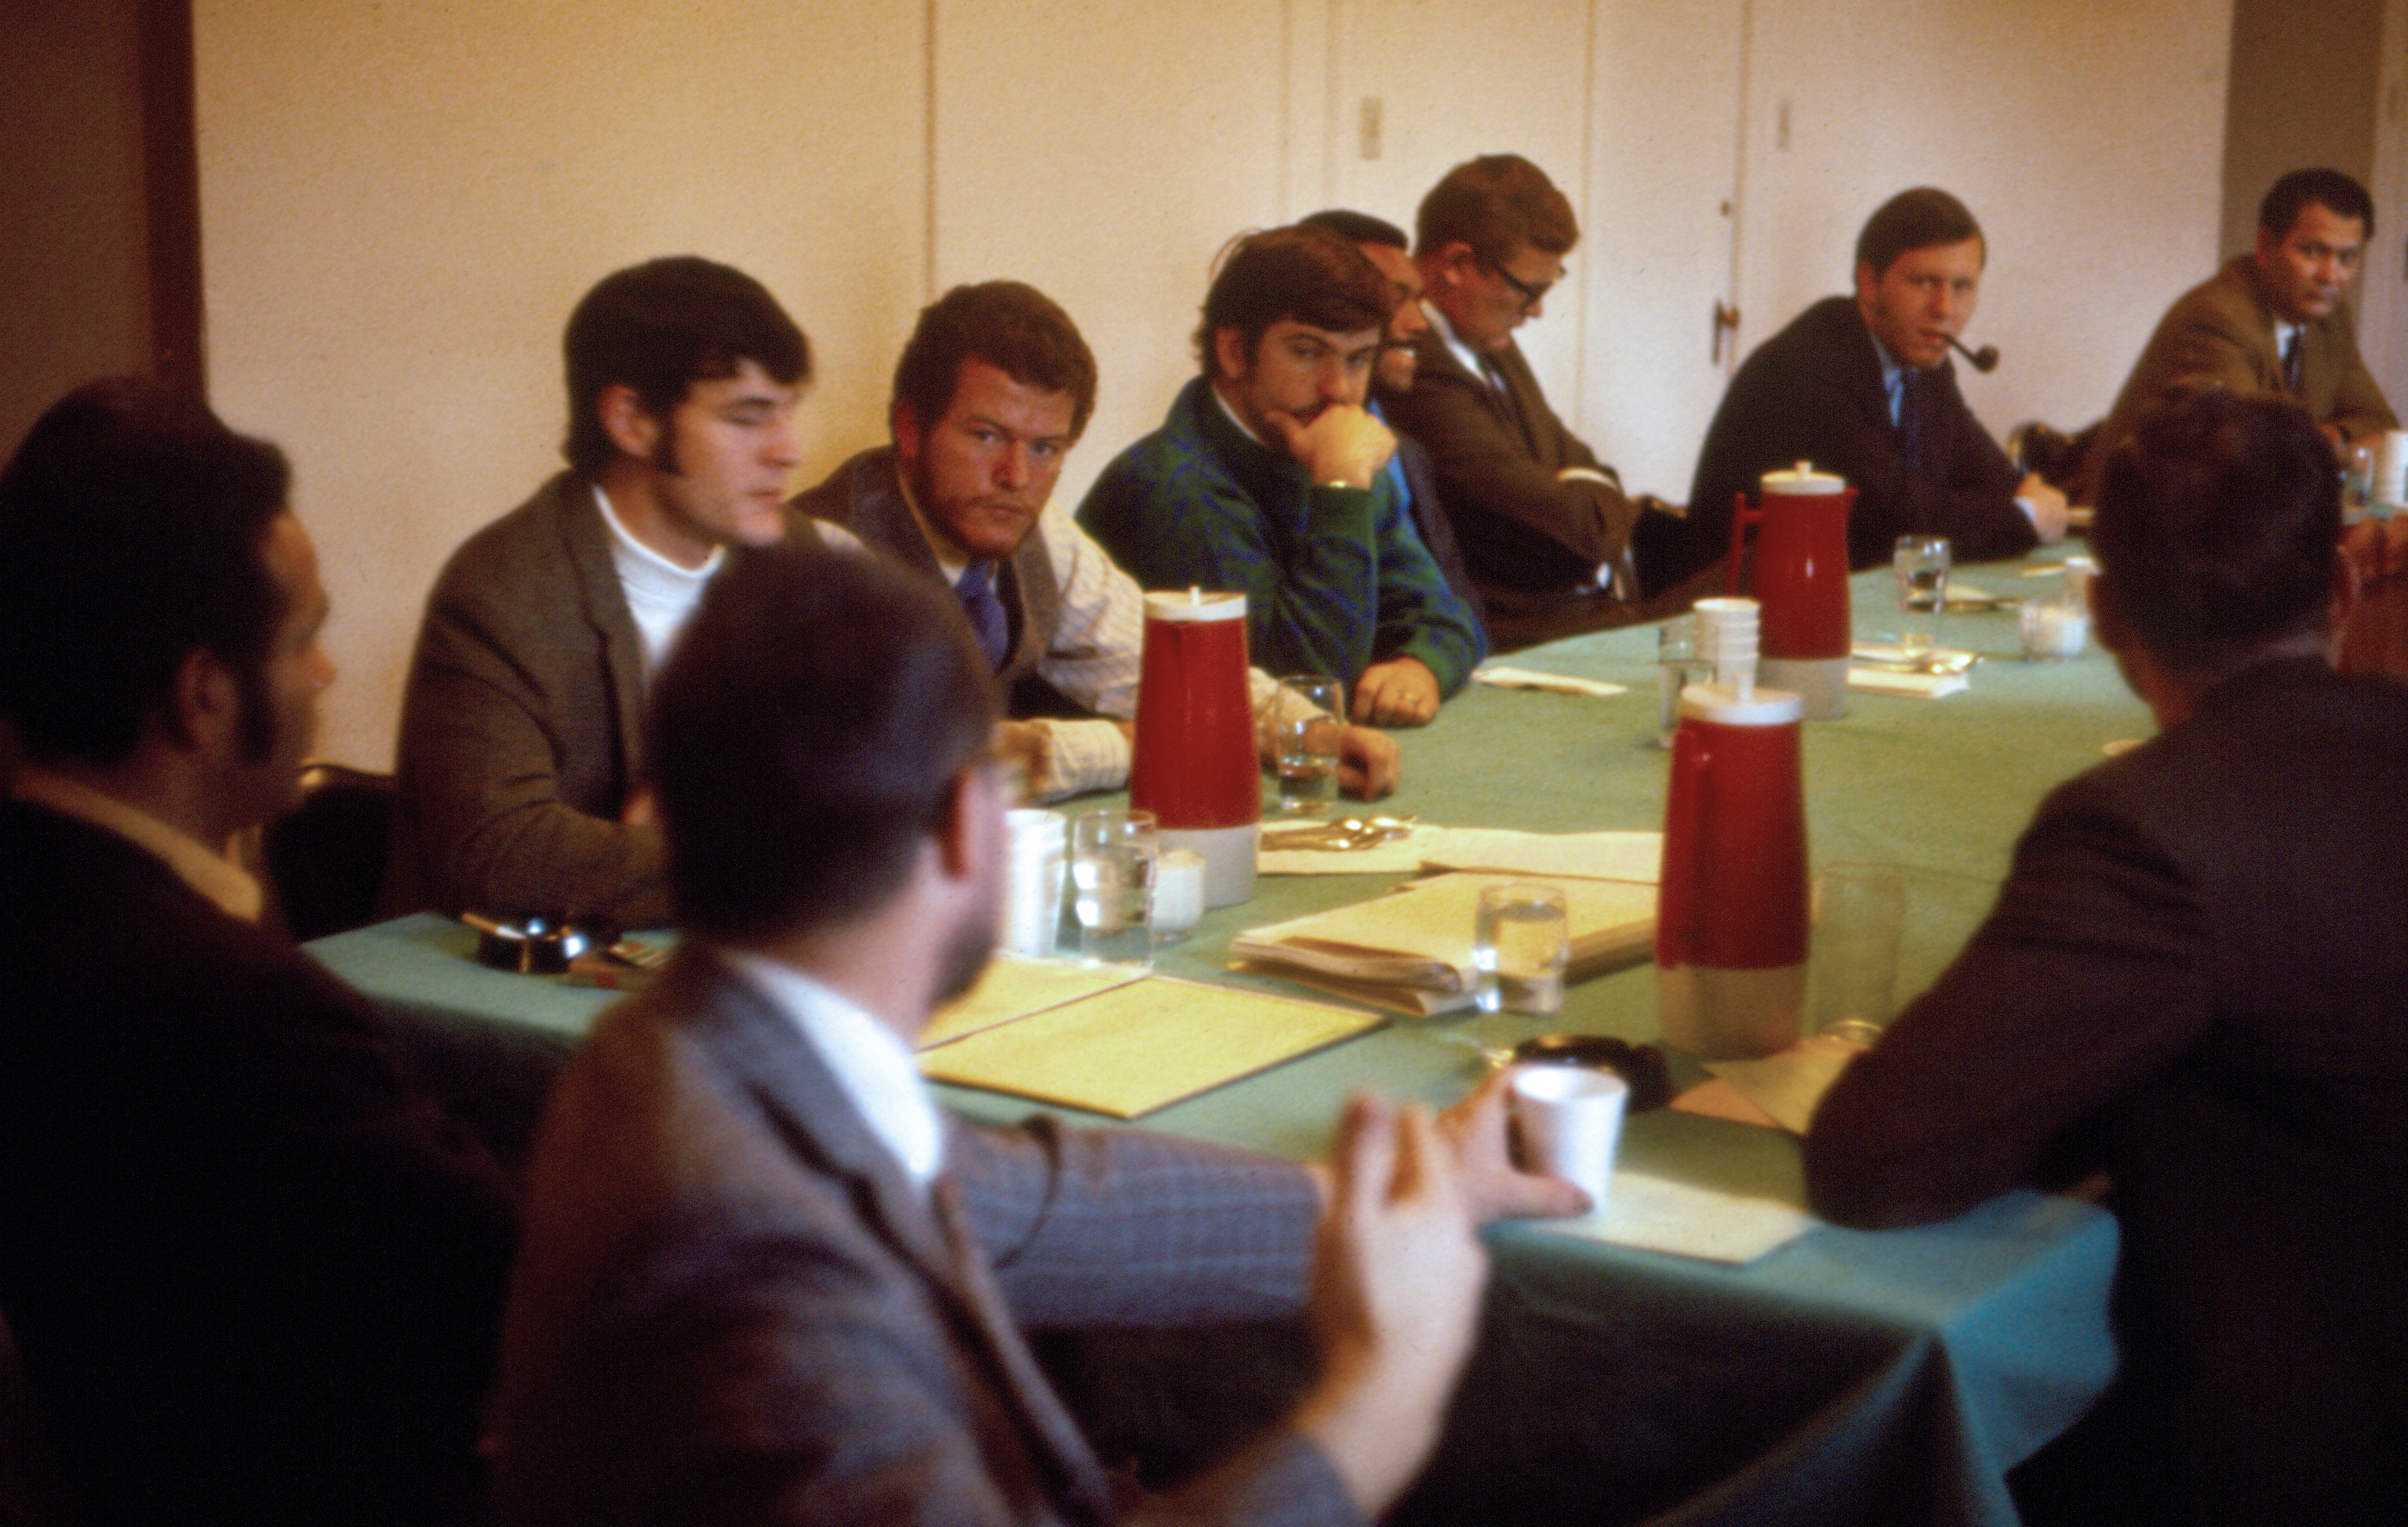 A meeting of the students and faculty of MEDEX in 1969. Dr. Richard Smith is to the far left. John Betz is at the right with a pipe.